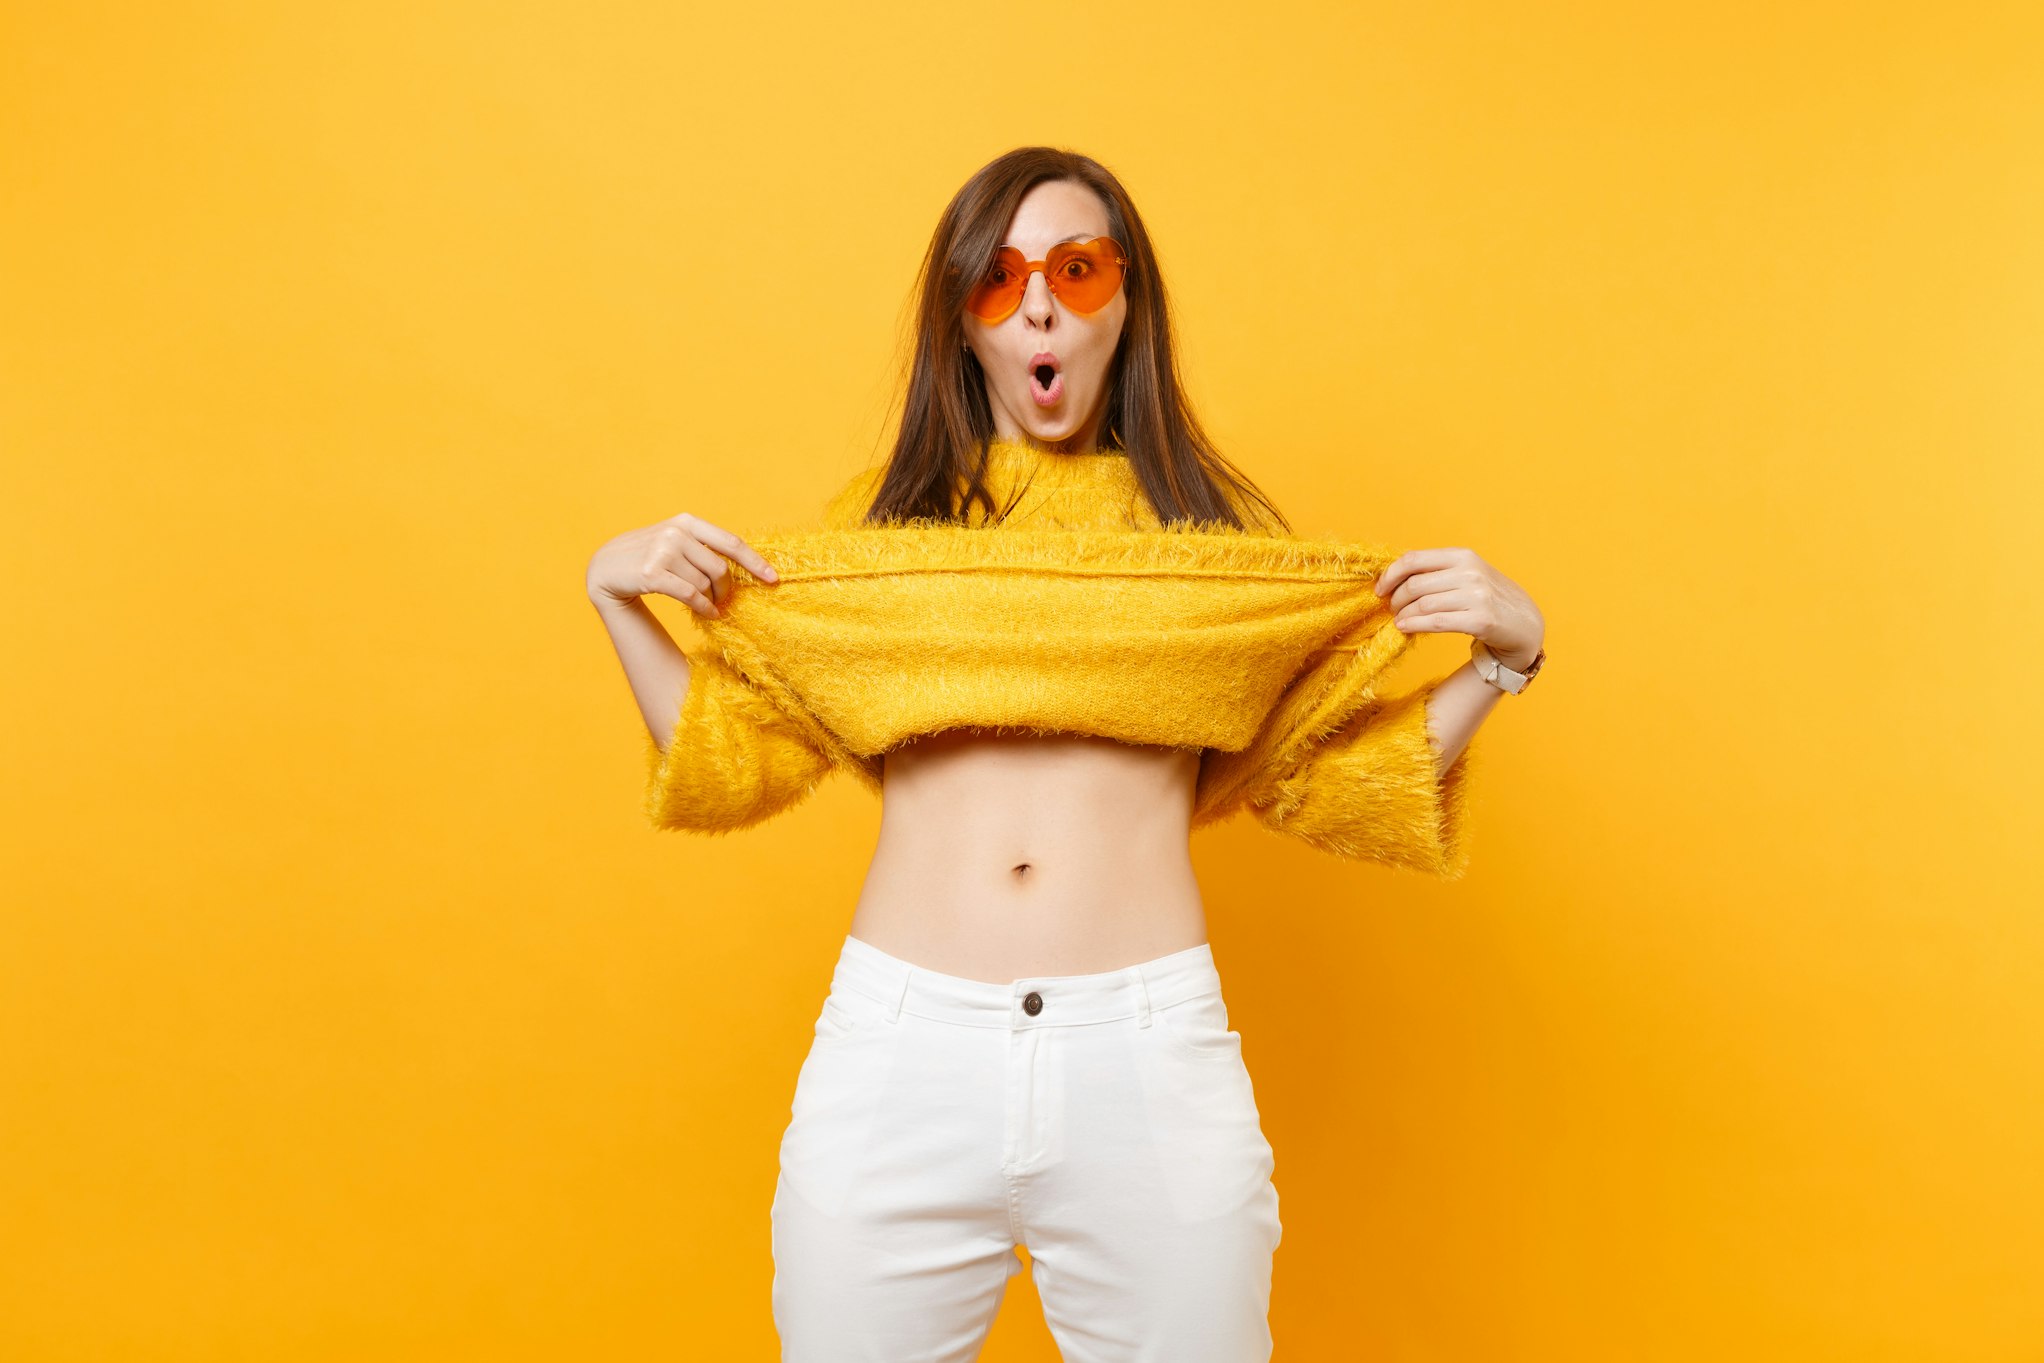 Woman lifting up her yellow sweater to showcase stomach